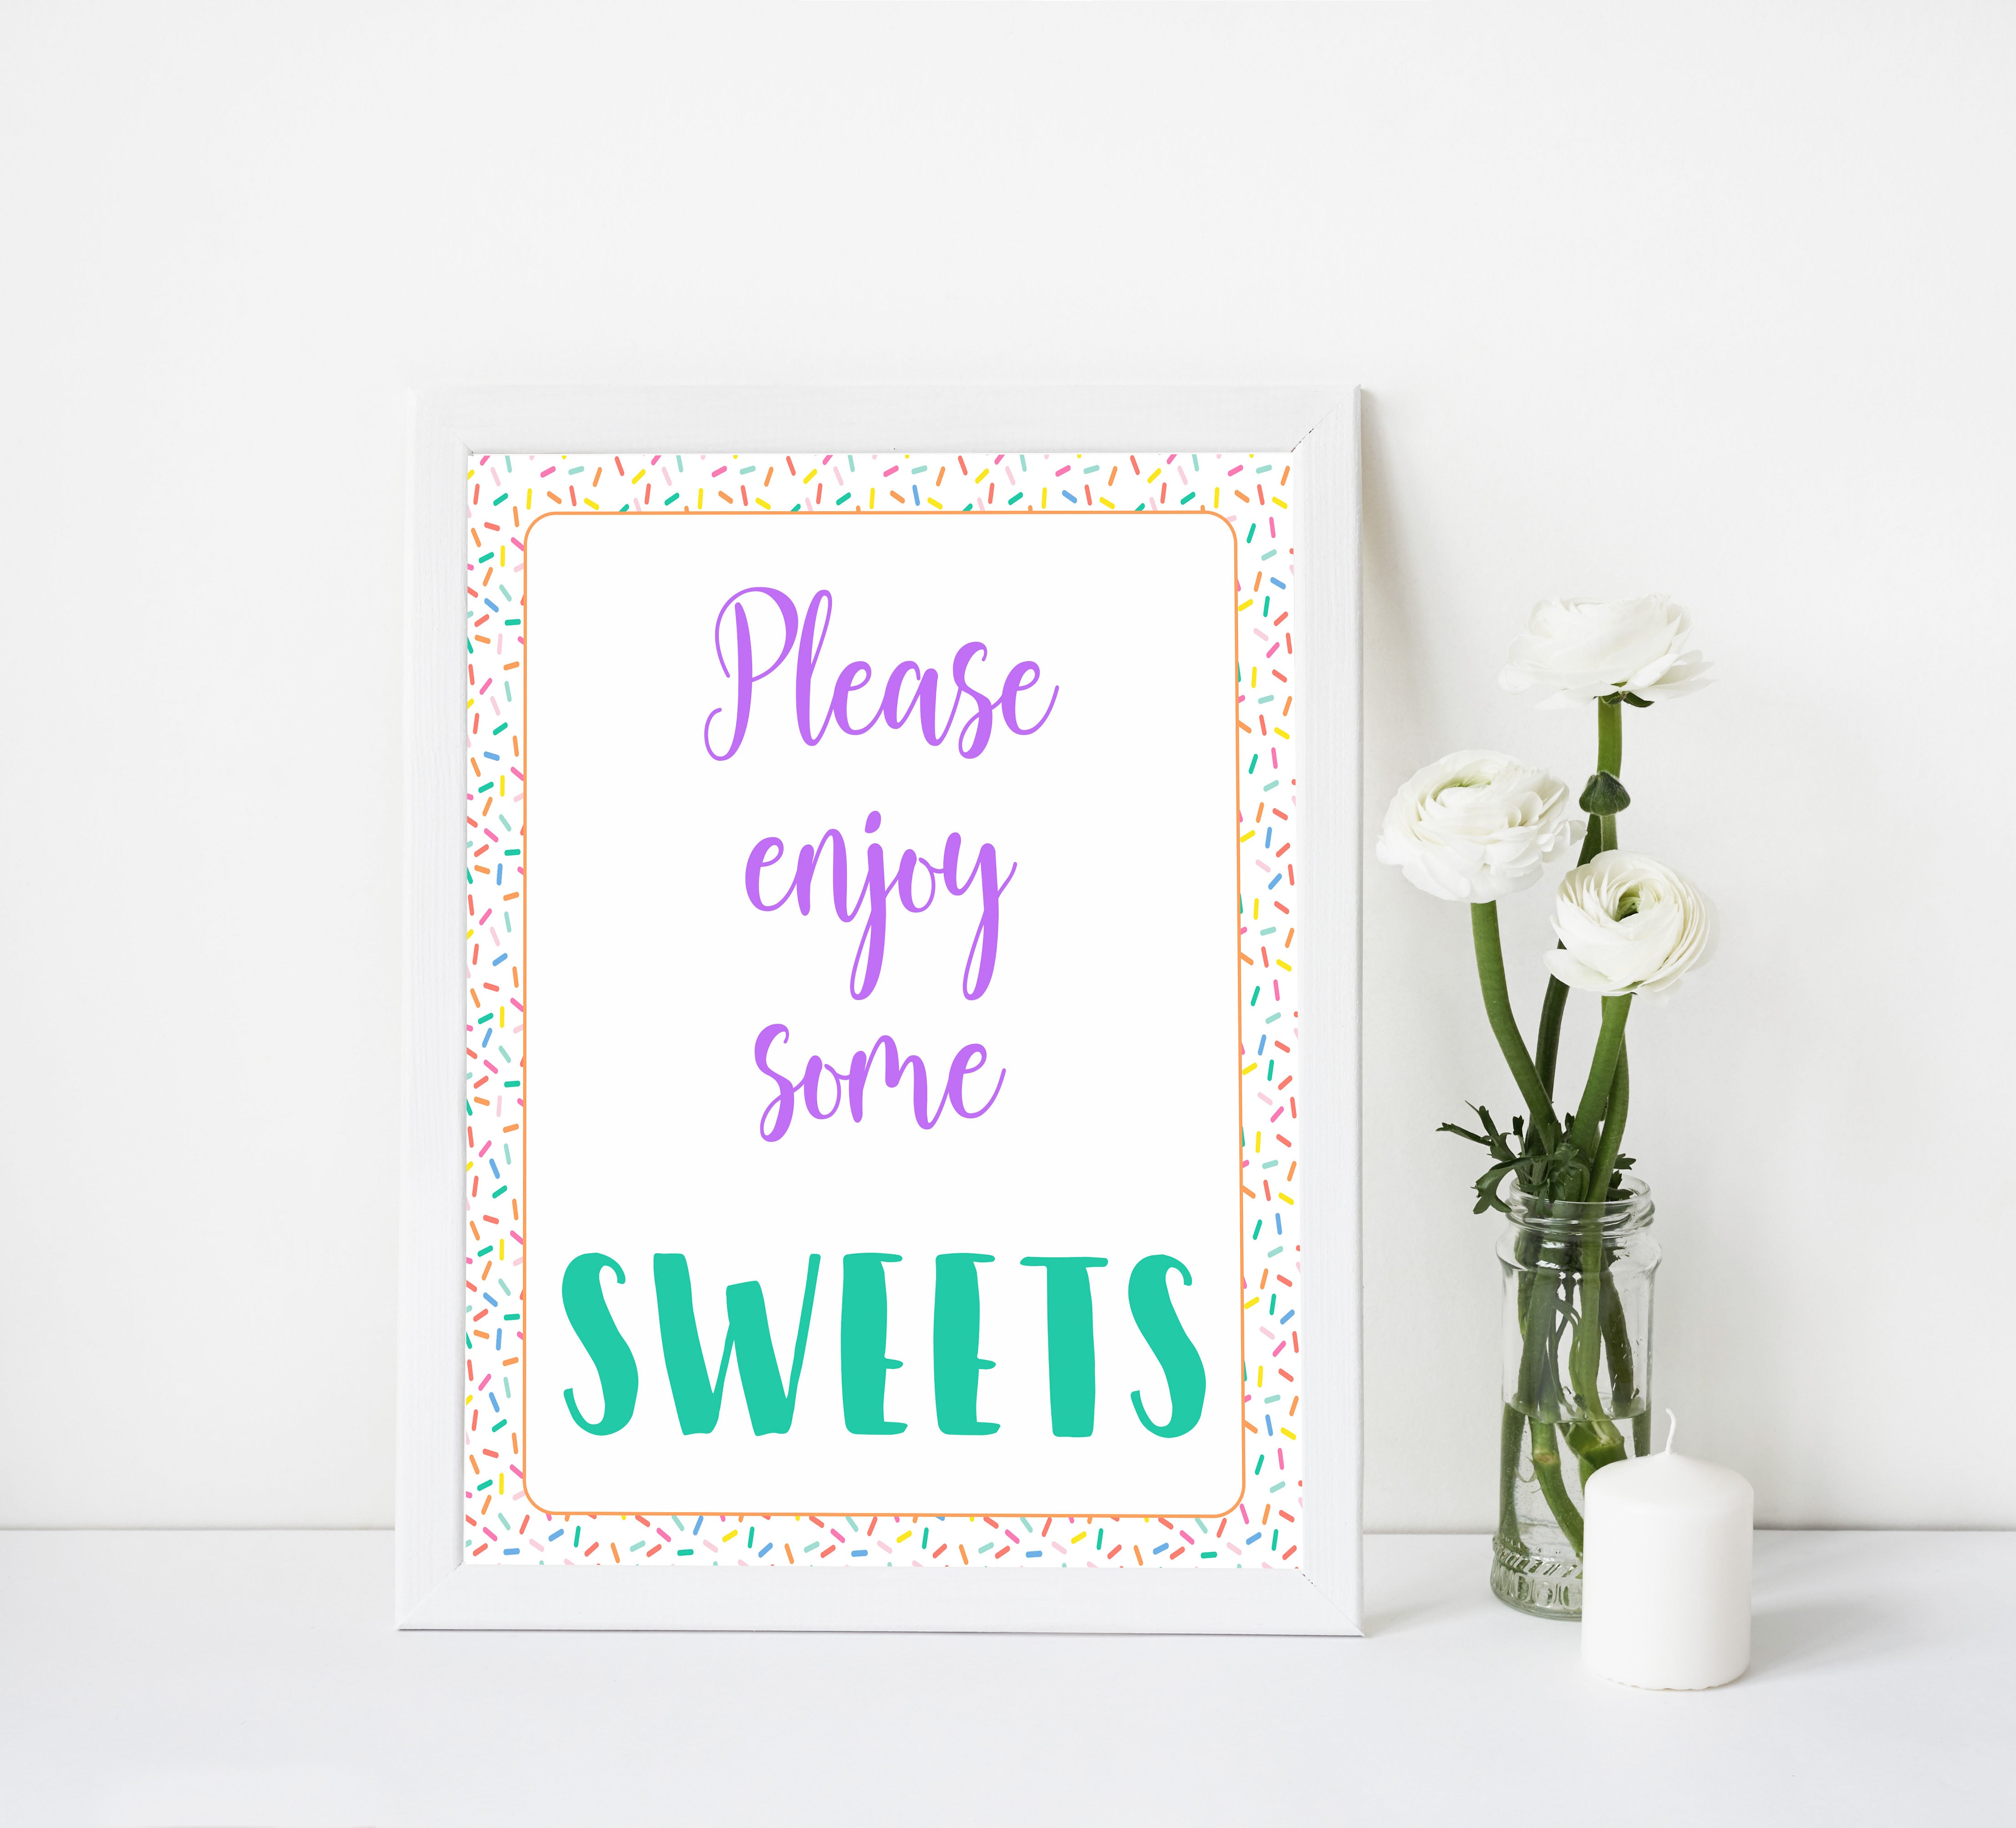 sweets baby table signs, sweets baby sign, Baby sprinkle baby decor, printable baby table signs, printable baby decor, baby sprinkle table signs, fun baby signs, baby sprinkle fun baby table signs